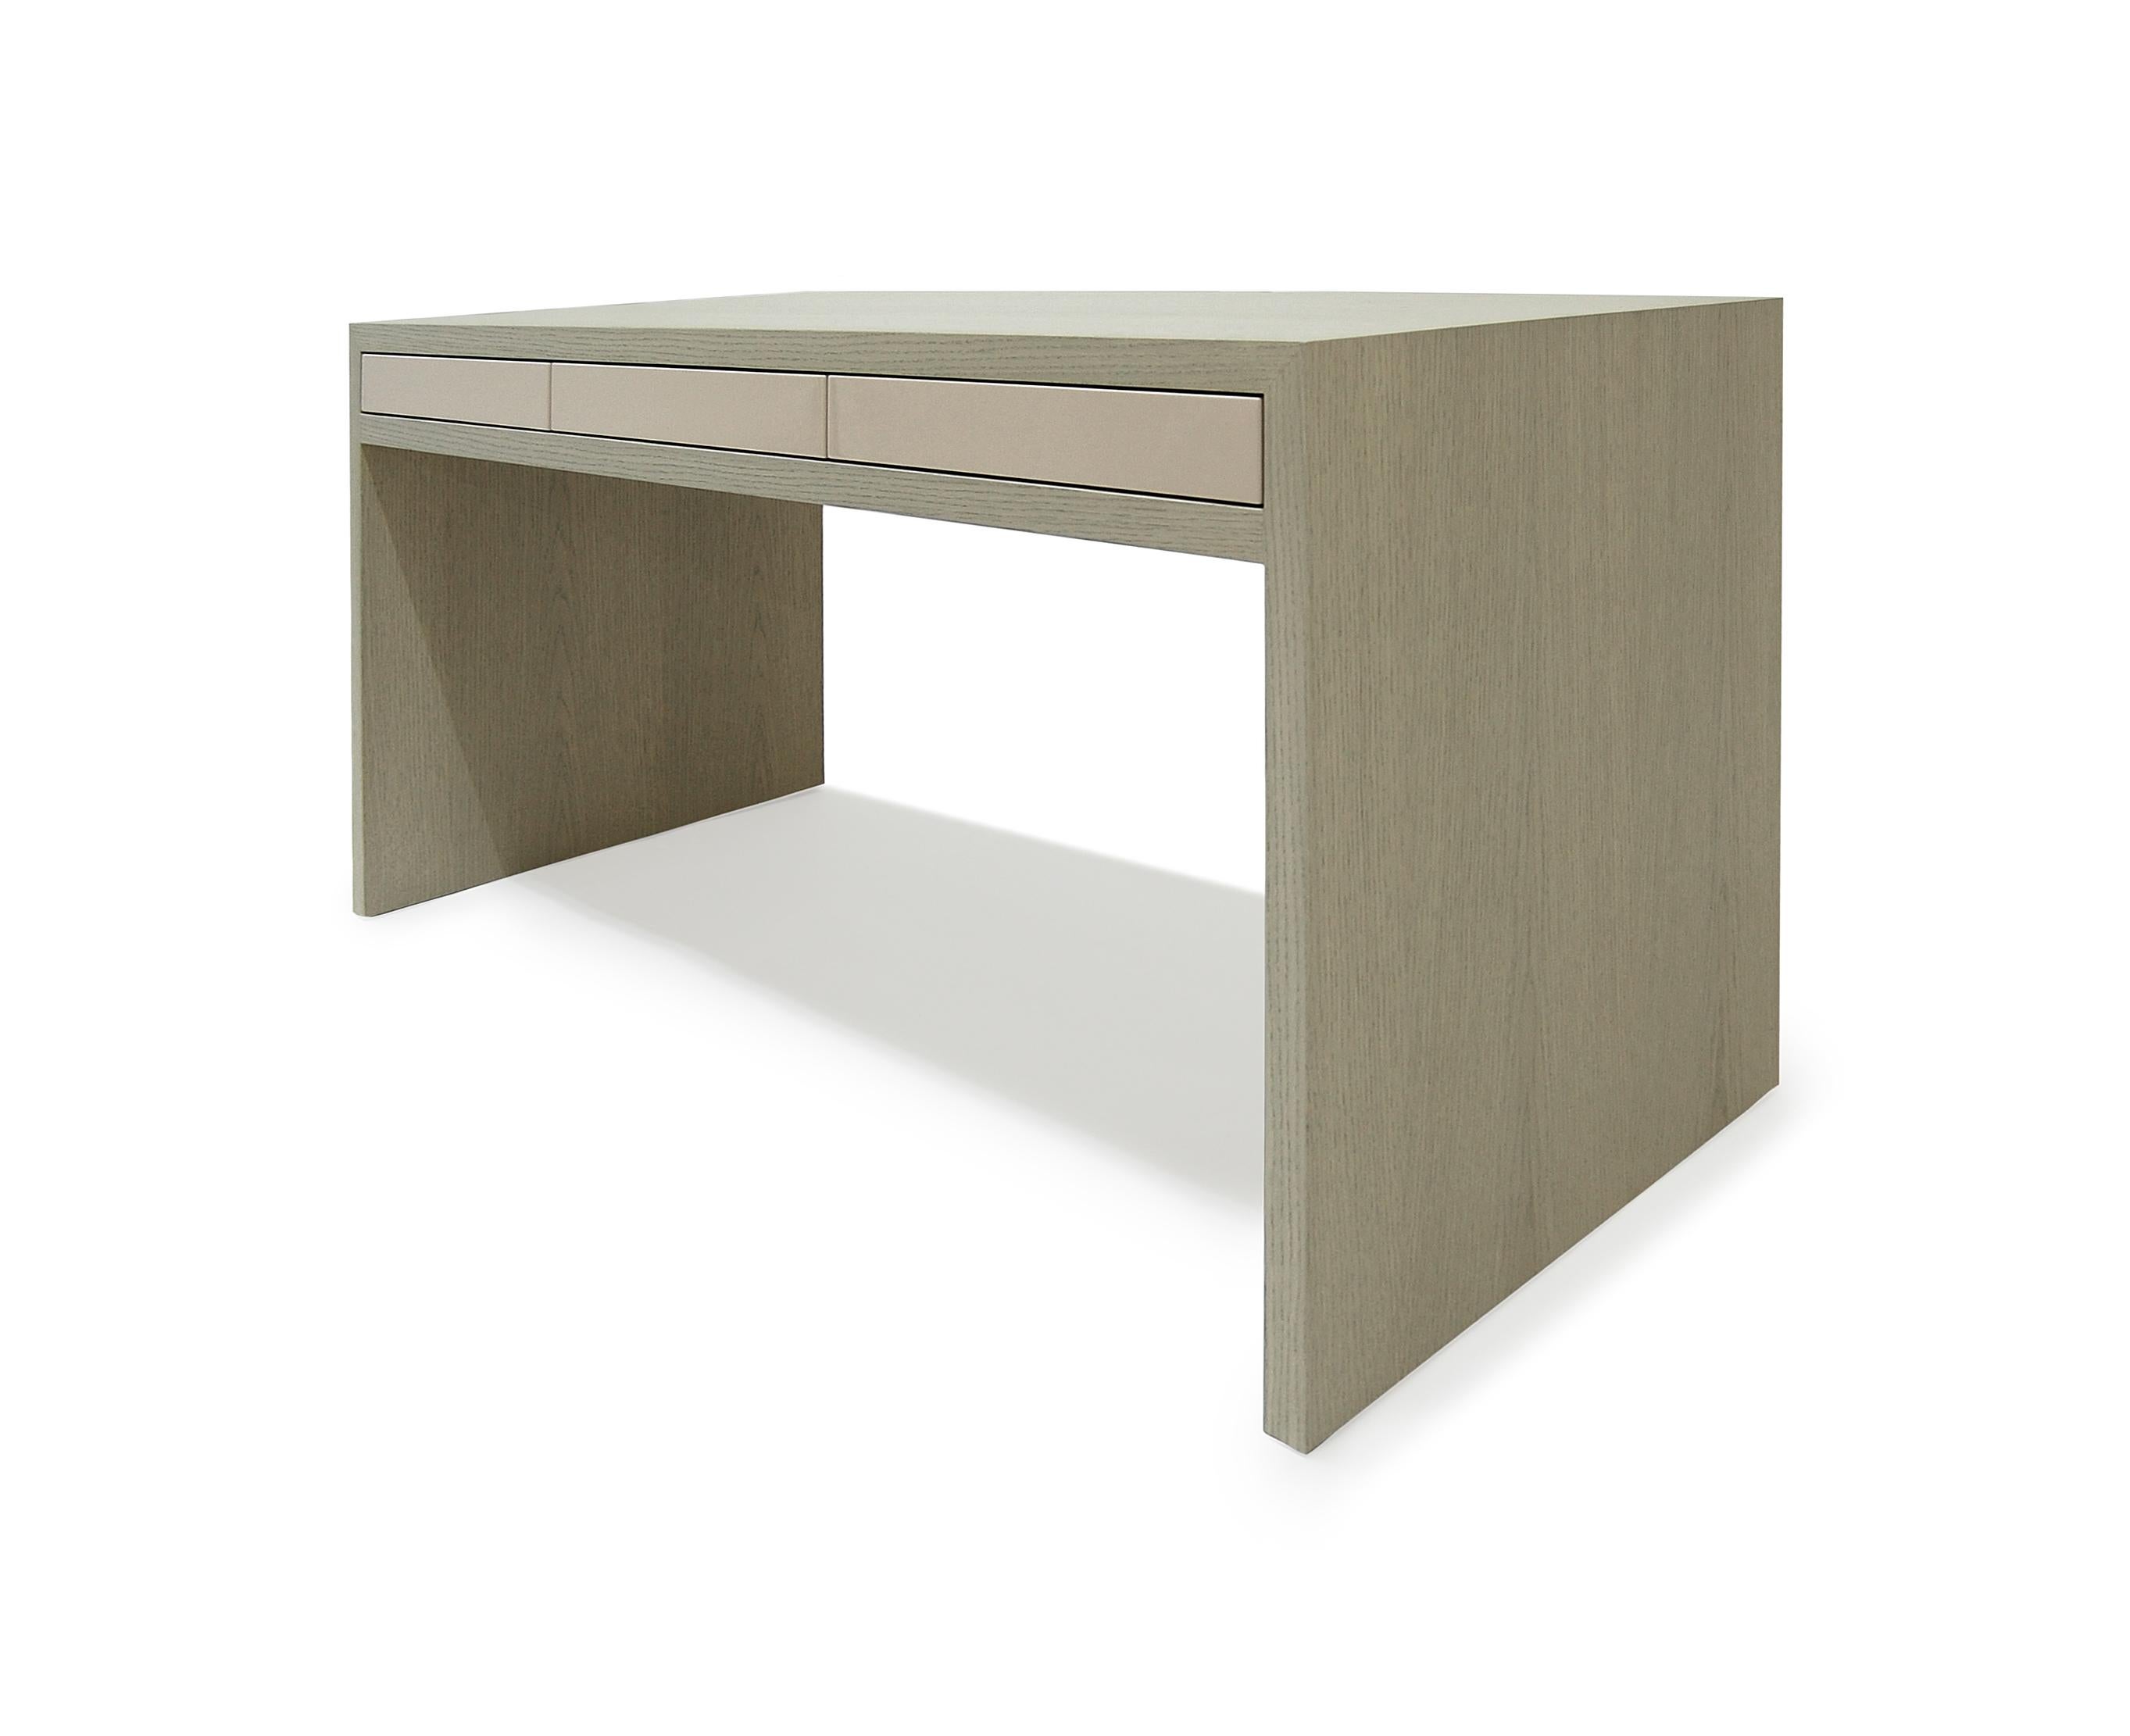 Contemporary Stash Desk lacquer & walnut , lacquer drawers, lacquer and wood desk, waterfall For Sale